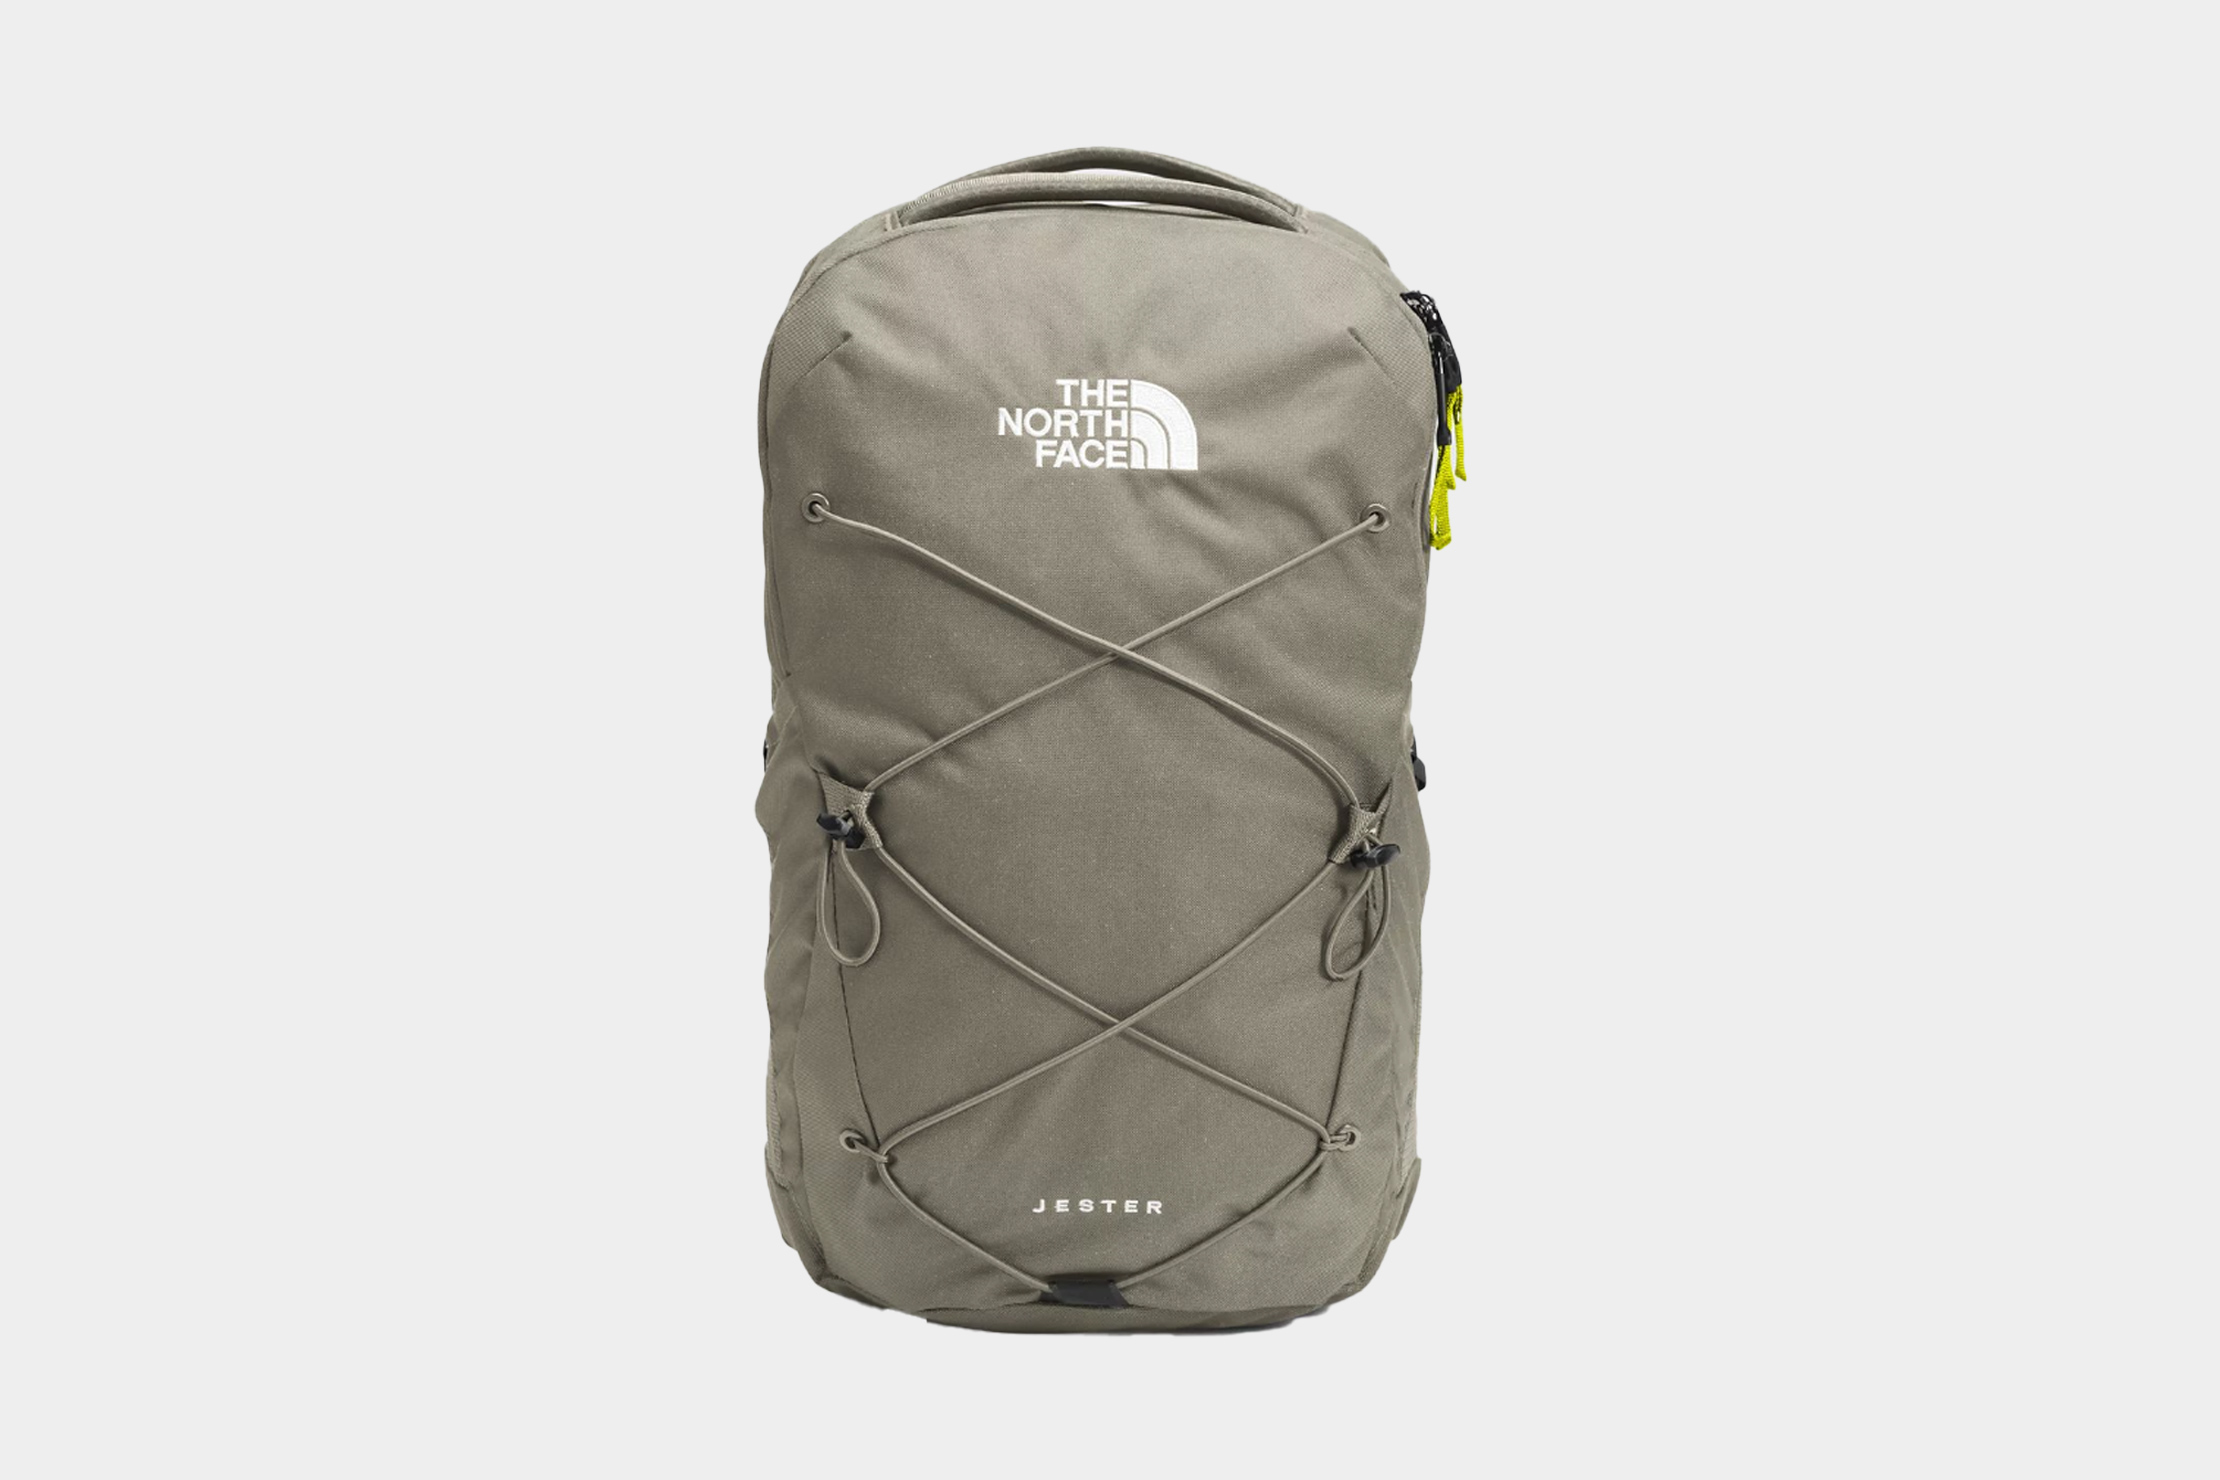  THE NORTH FACE Jester Commuter Laptop Backpack, TNF